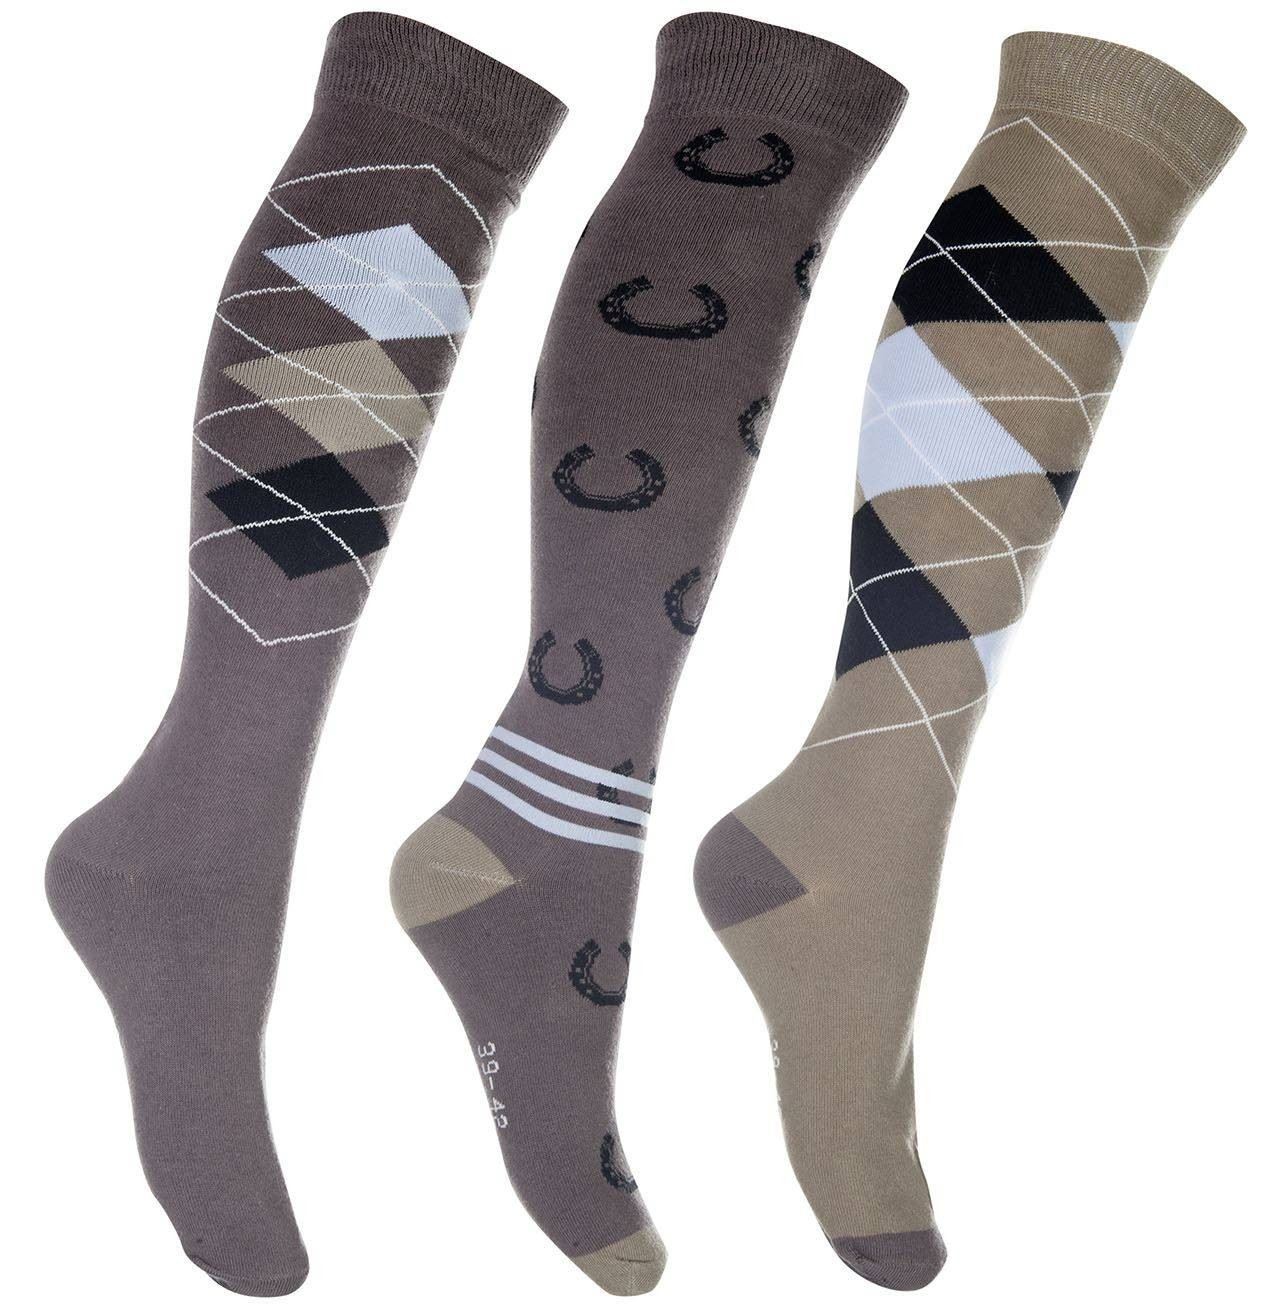 HKM Riding Socks Cardiff Set Of 3 Pairs (Pack Of 5) - Just Horse Riders